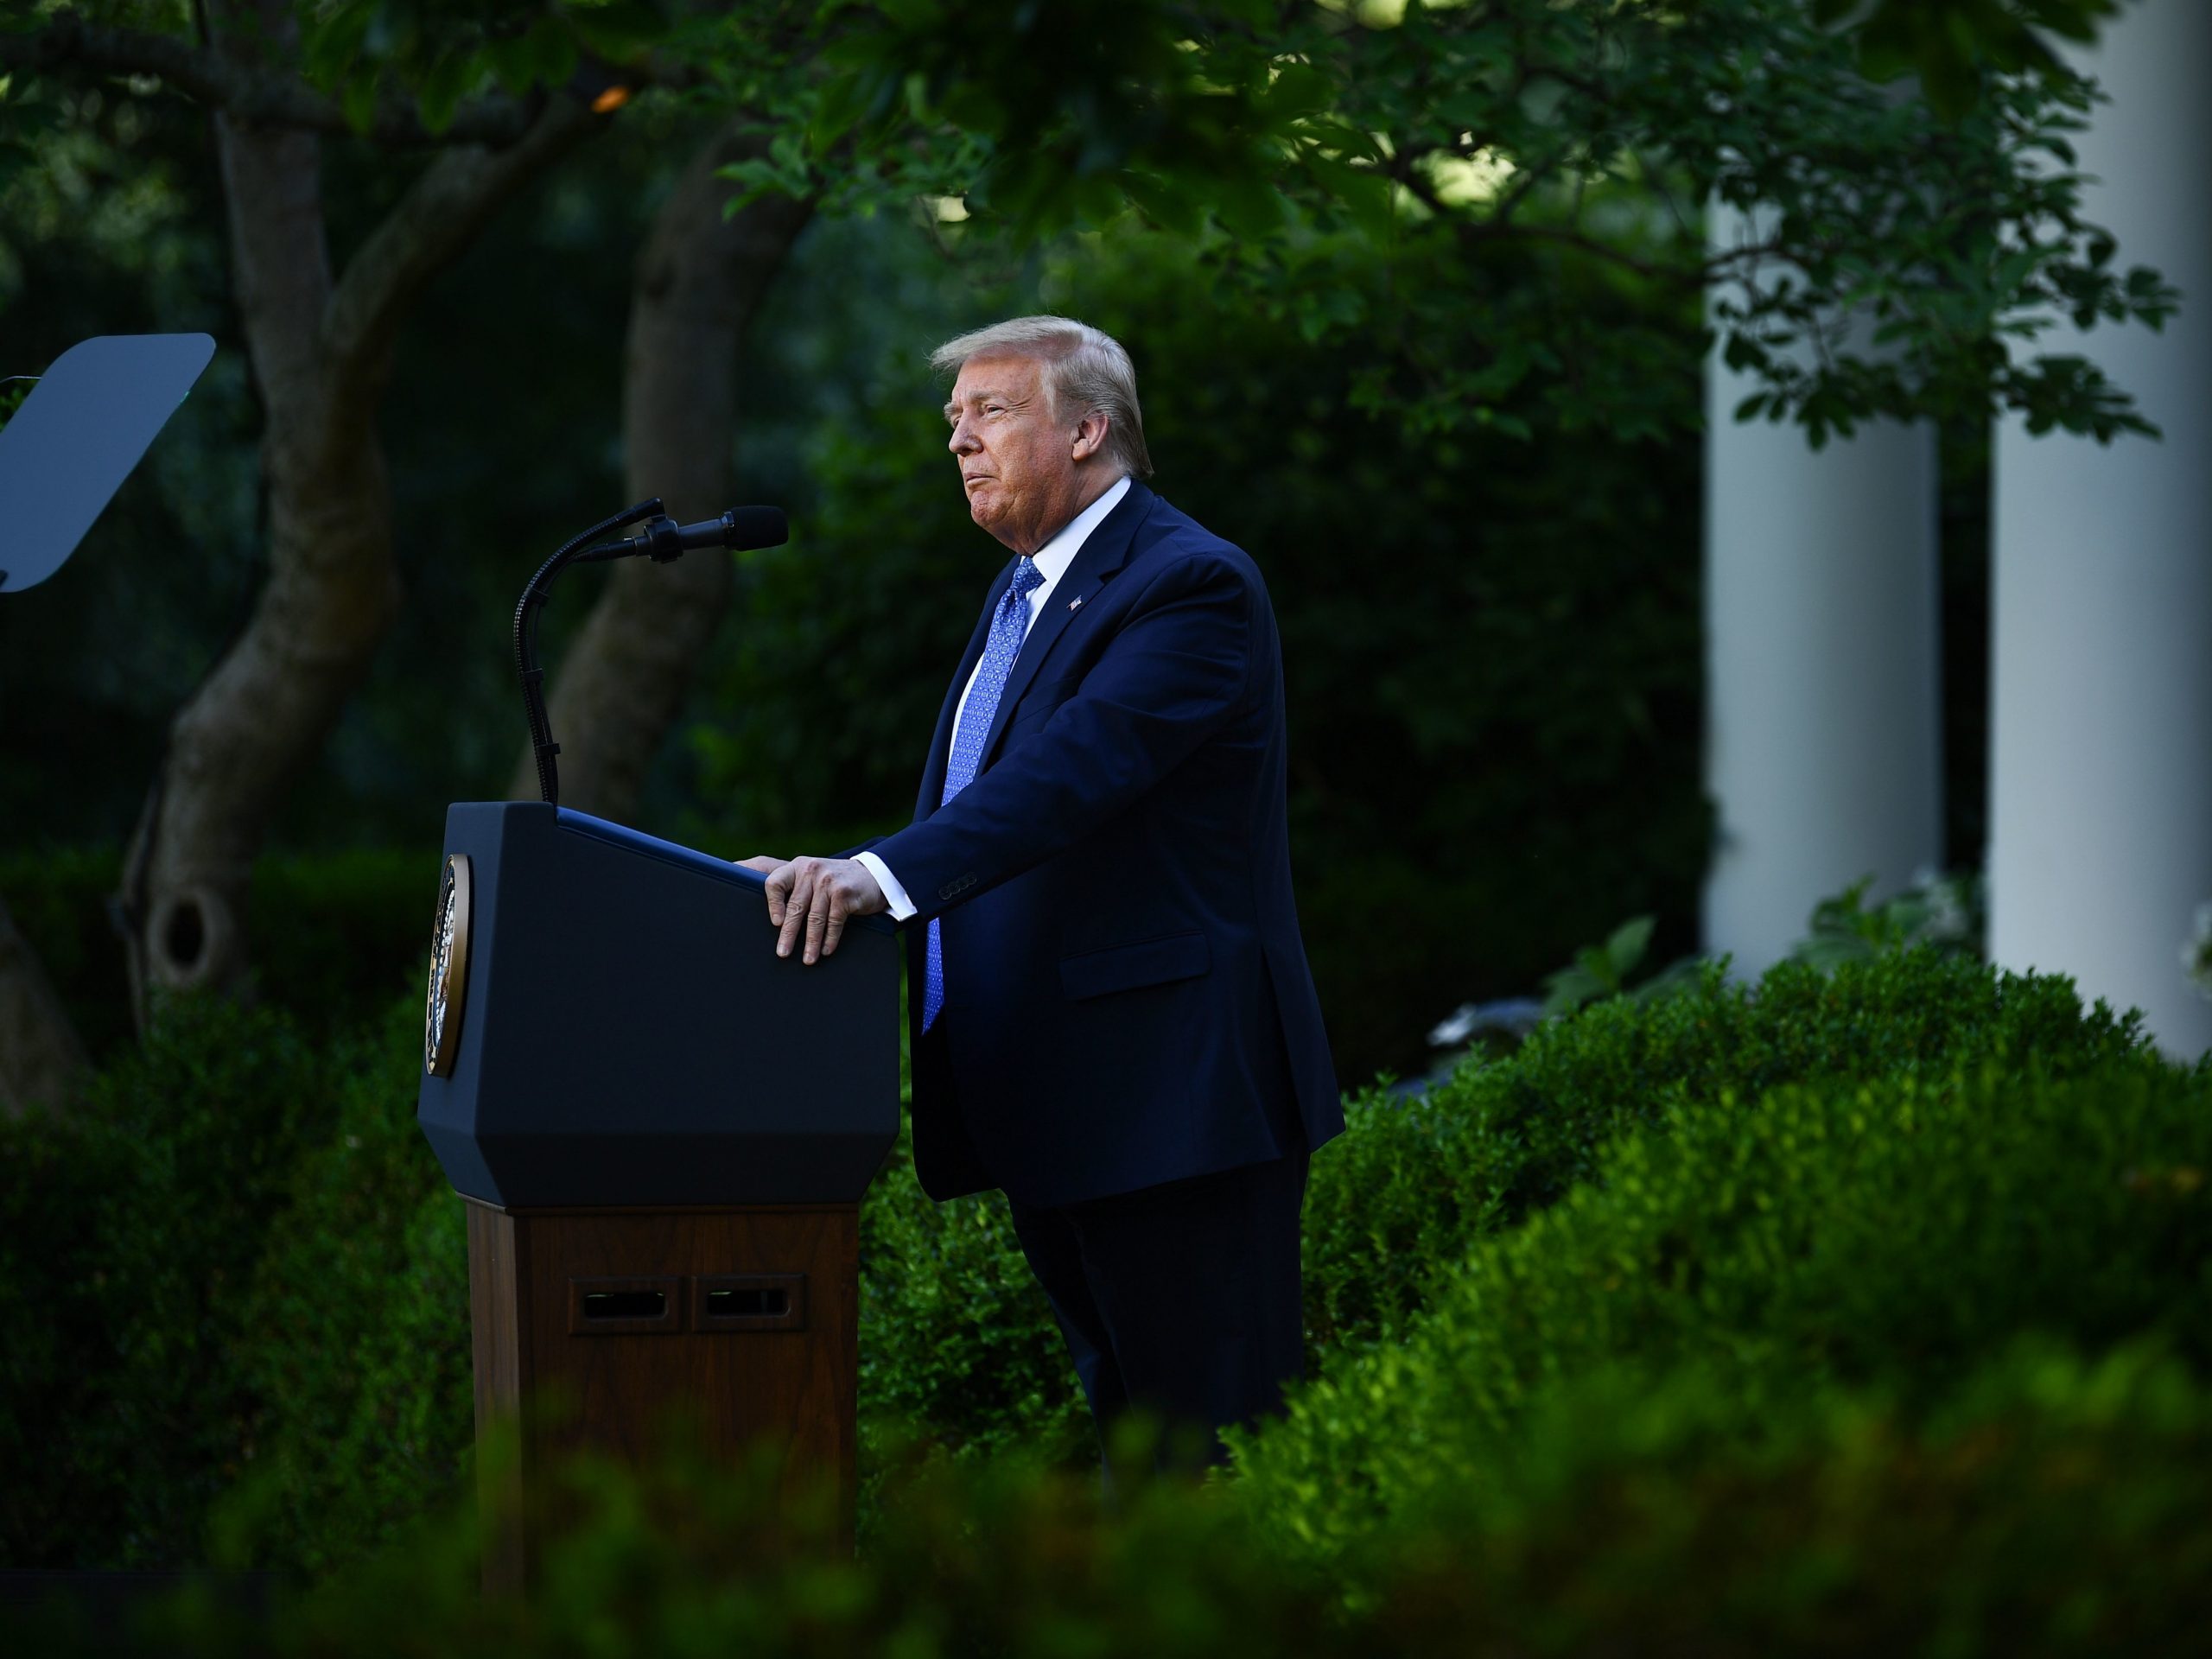 President Trump delivers remarks in front of the media in the Rose Garden of the White House on Monday.